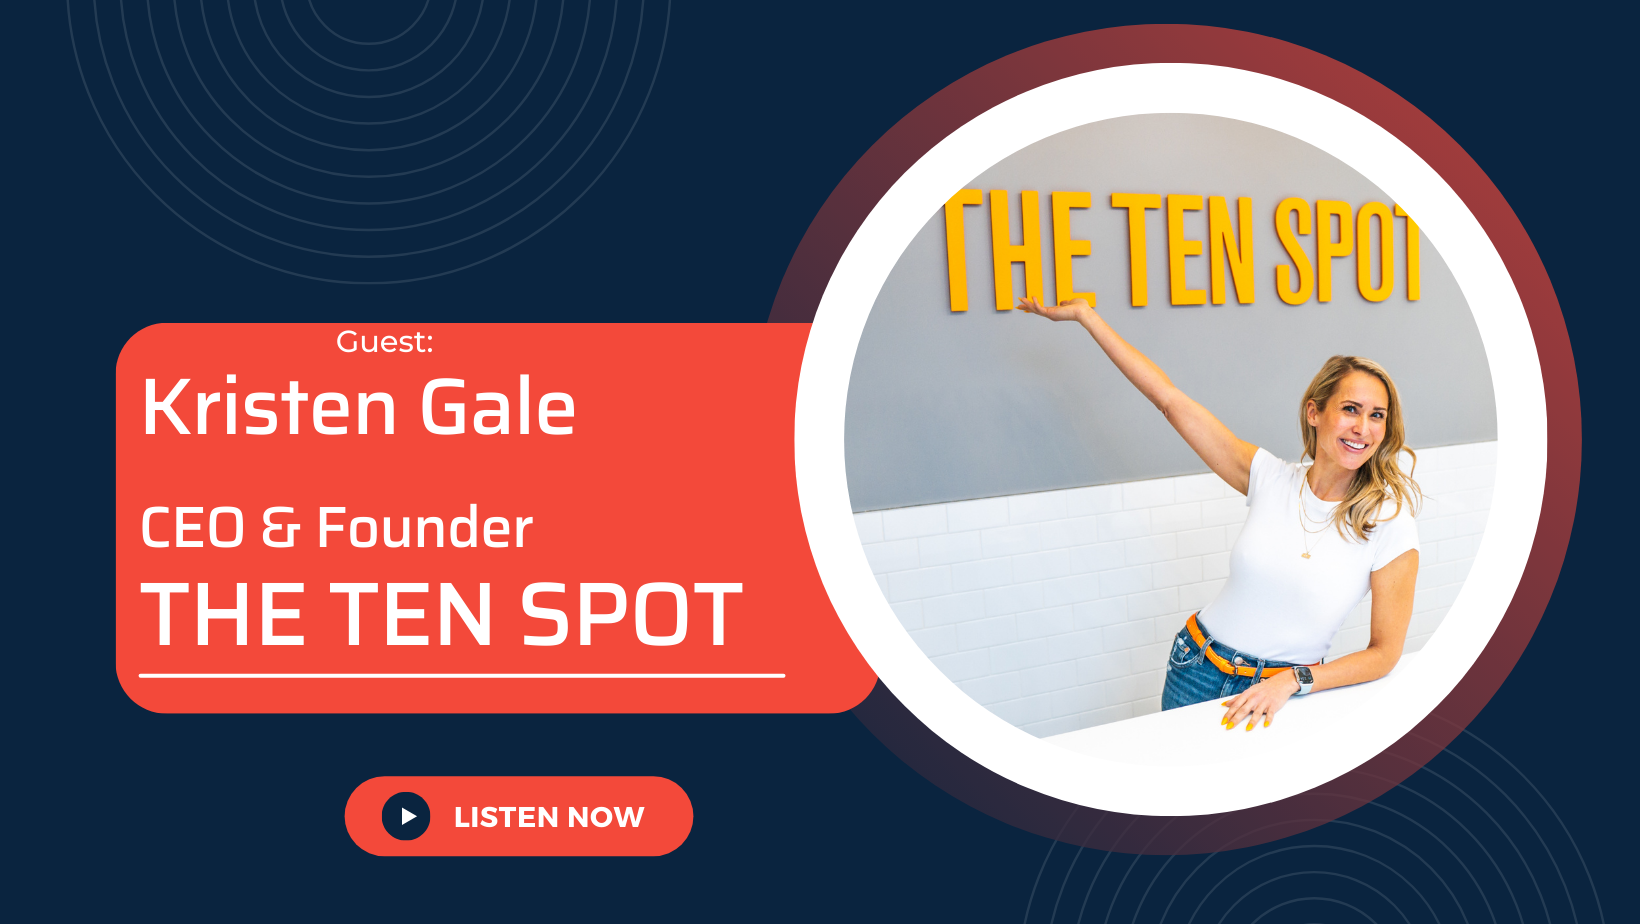 How To Take Your Business To The Next Level with the CEO & Founder of THE TEN SPOT, Kristen Gale